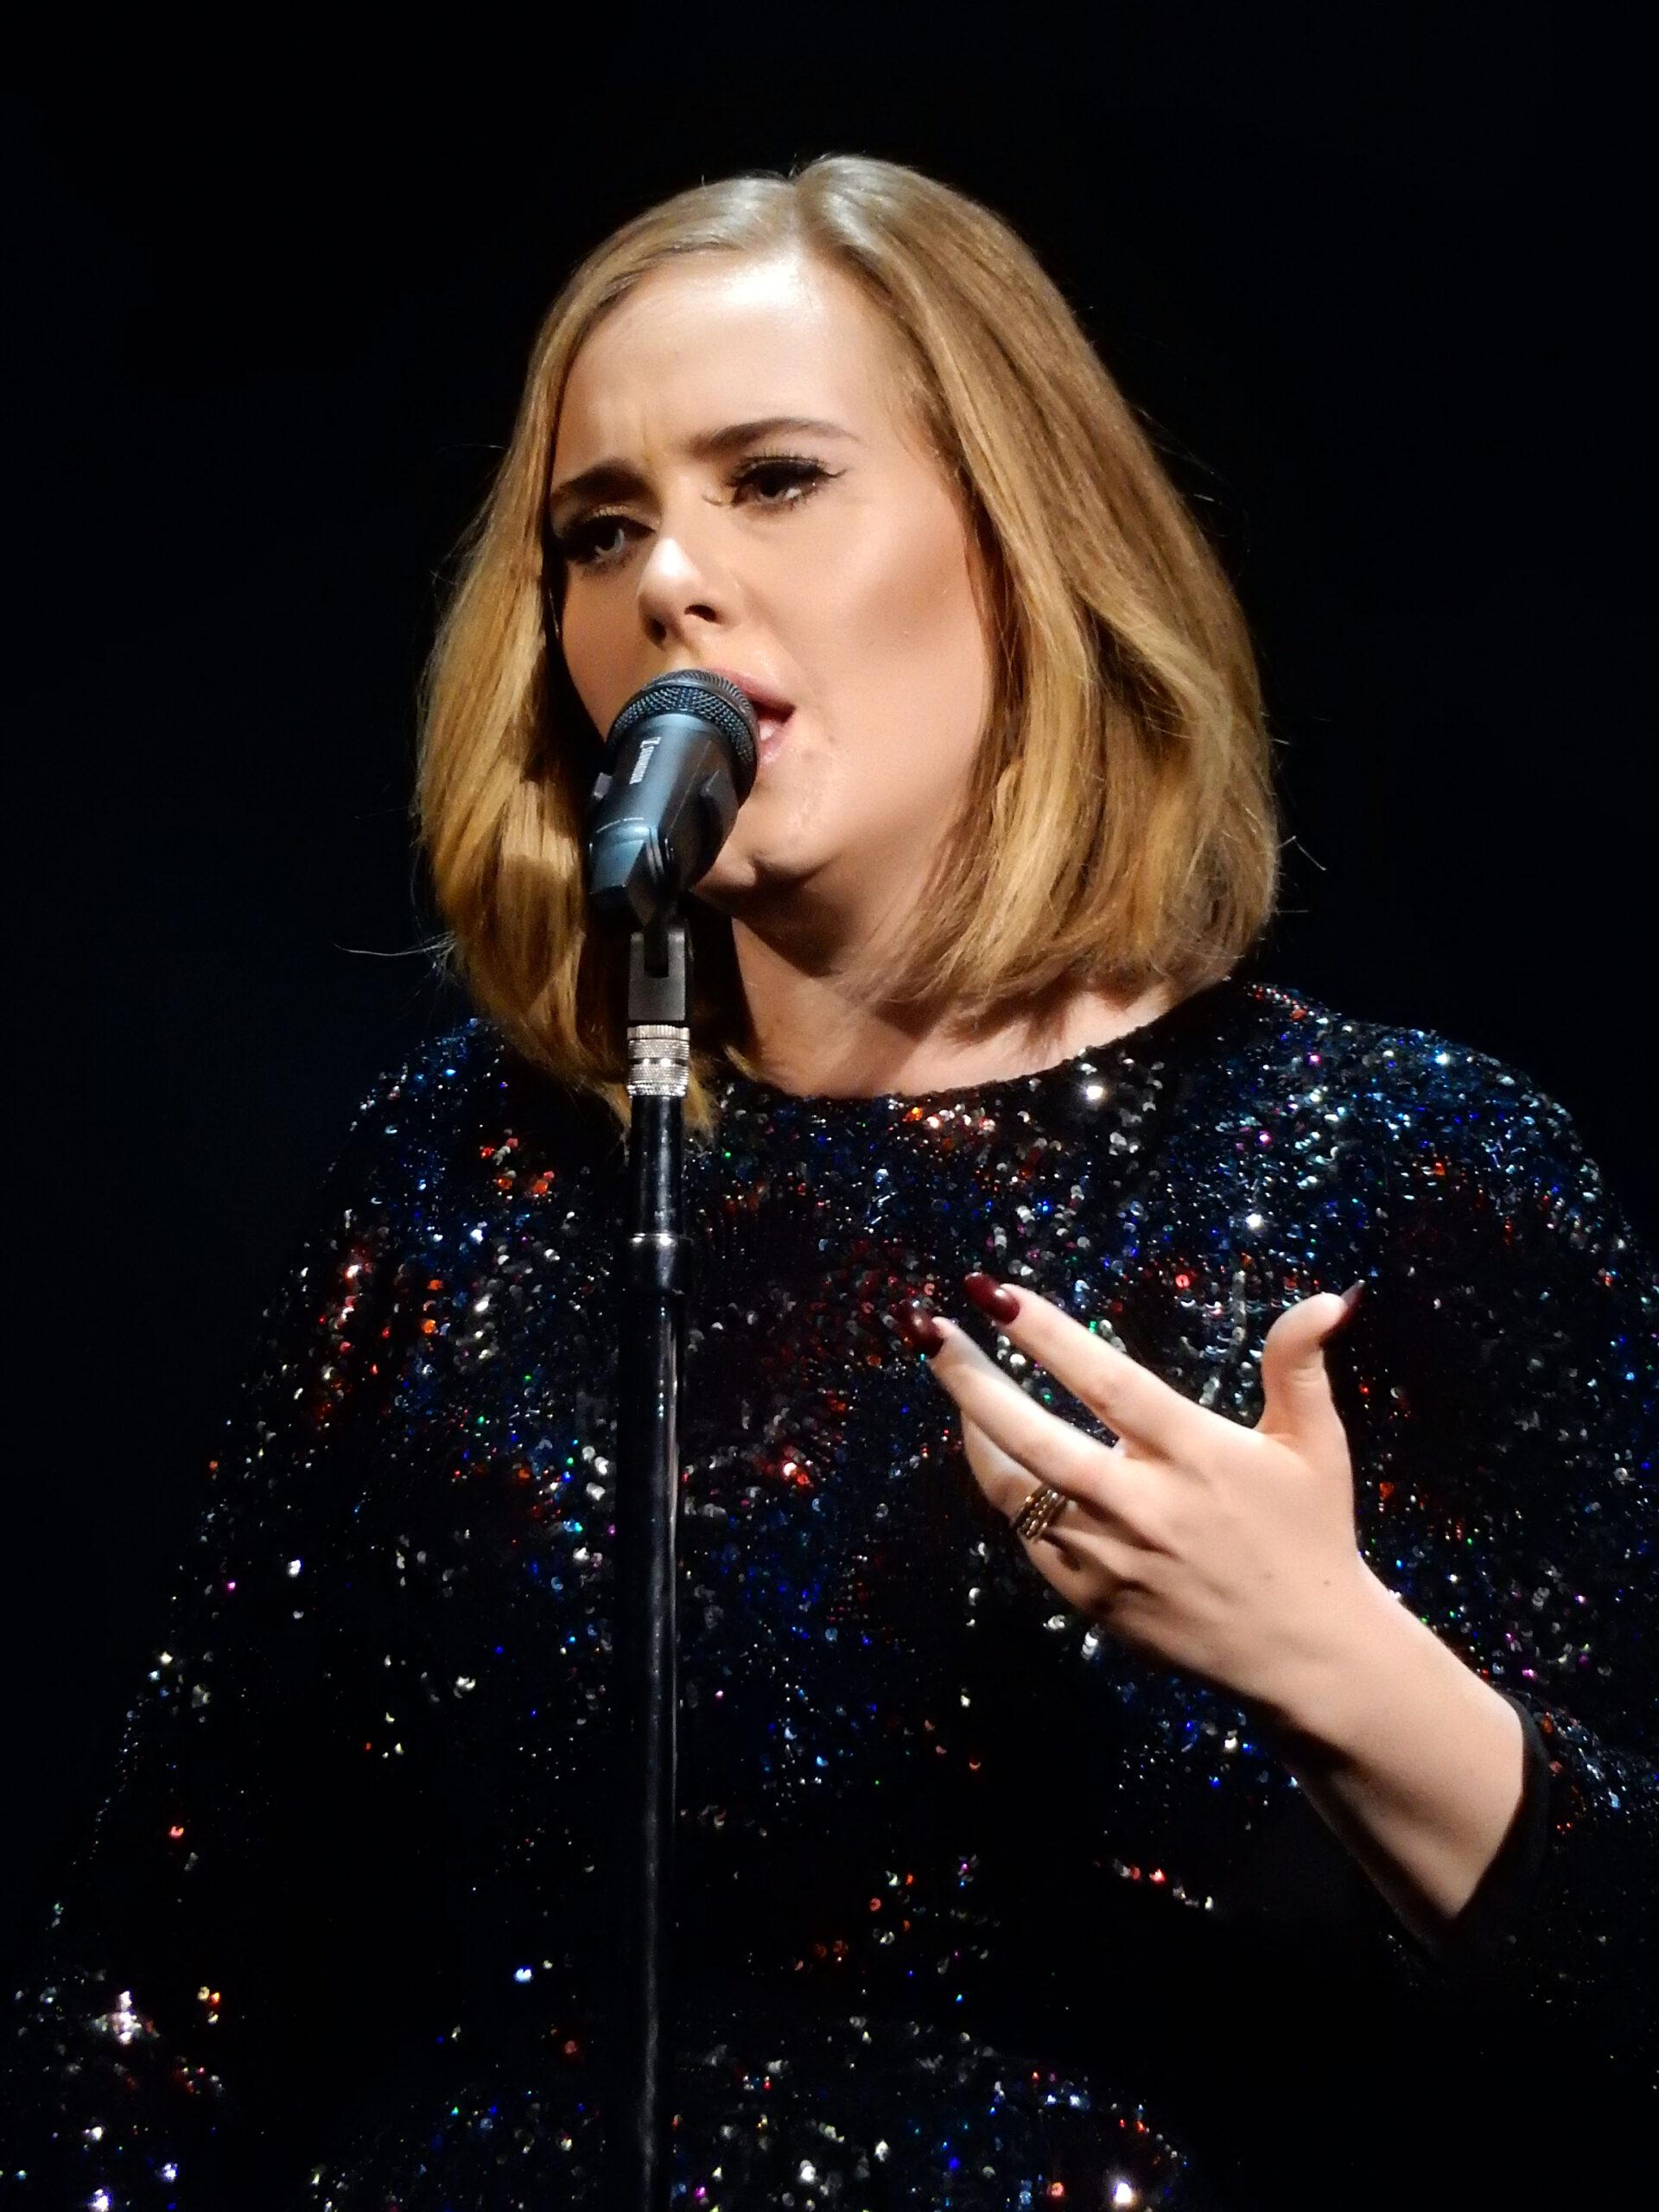 Adele Is Reportedly Making Over $1 MILLION Per Show In Las Vegas Residency